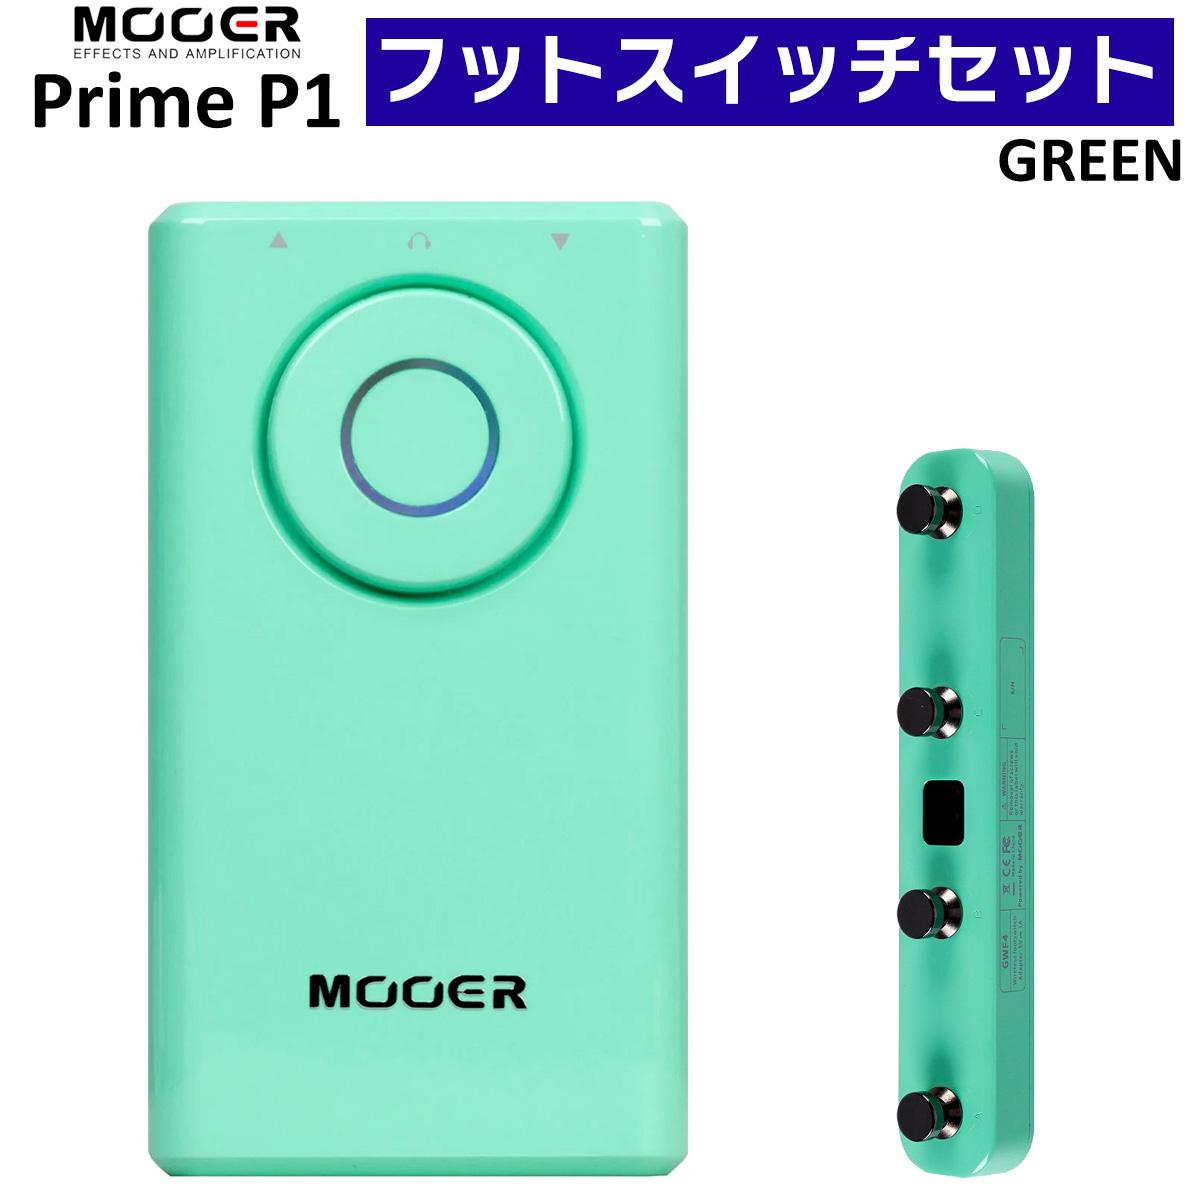 MOOER Prime P1 Guitar Multi-Effects Processor, Bass Guitar Pedals with  Tuner, Amp, Metronome for Practice and Performance 楽器アクセサリー